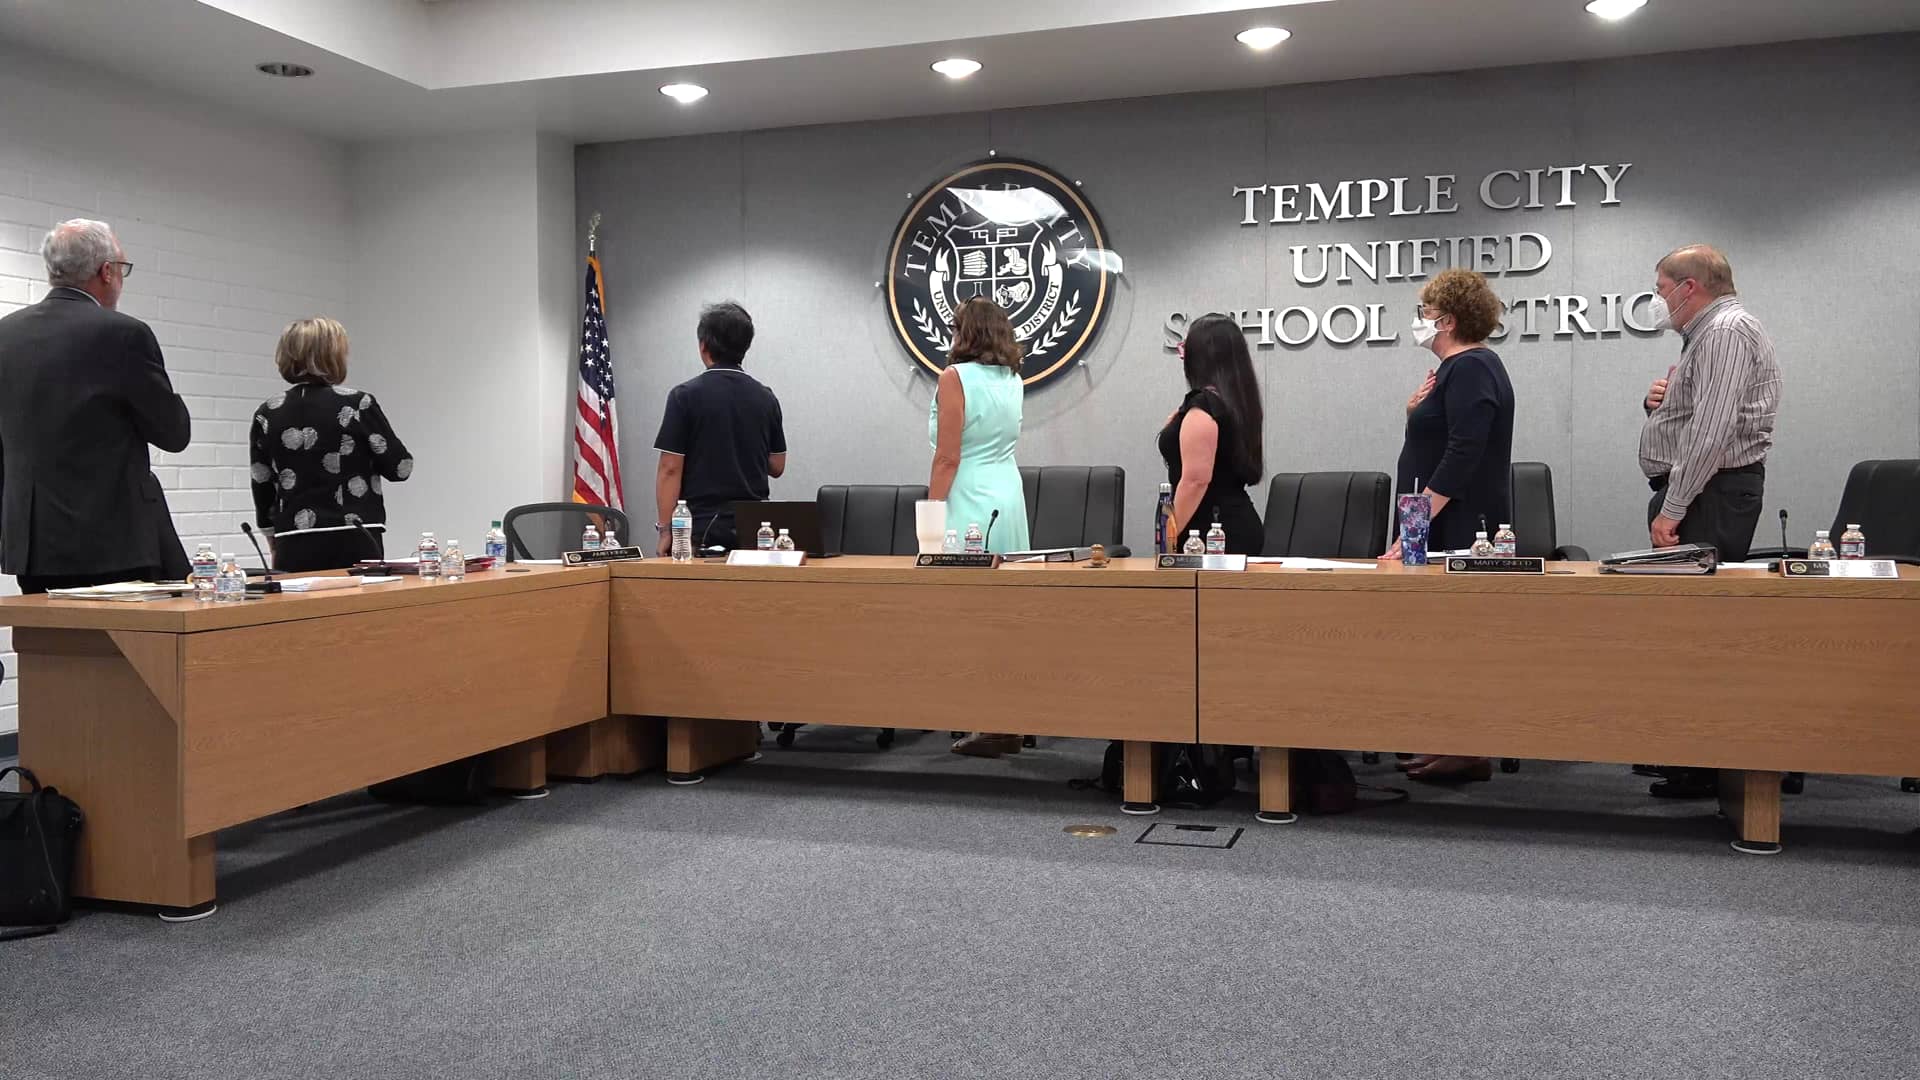 july-27-2022-temple-city-unified-school-district-special-meeting-with-the-cosca-group-on-vimeo